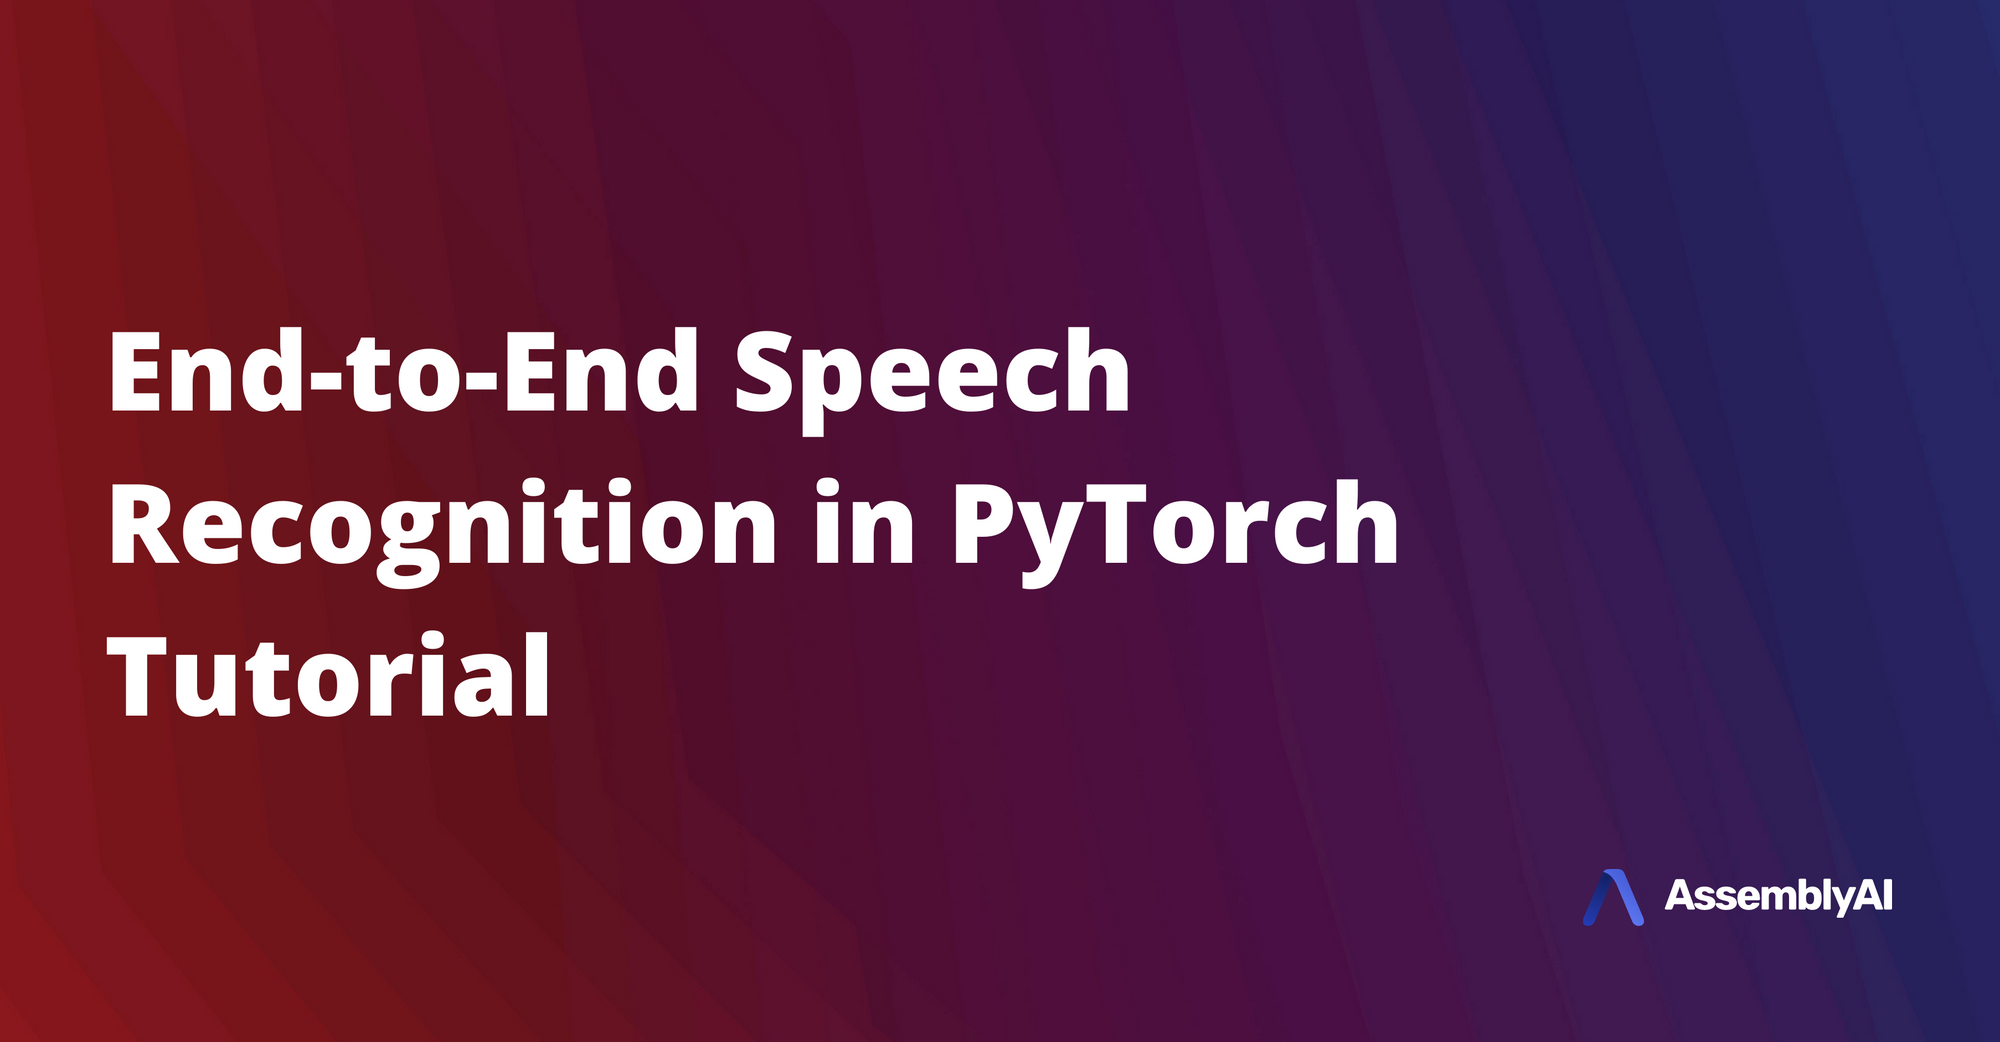 Building an End-to-End Speech Recognition Model in PyTorch